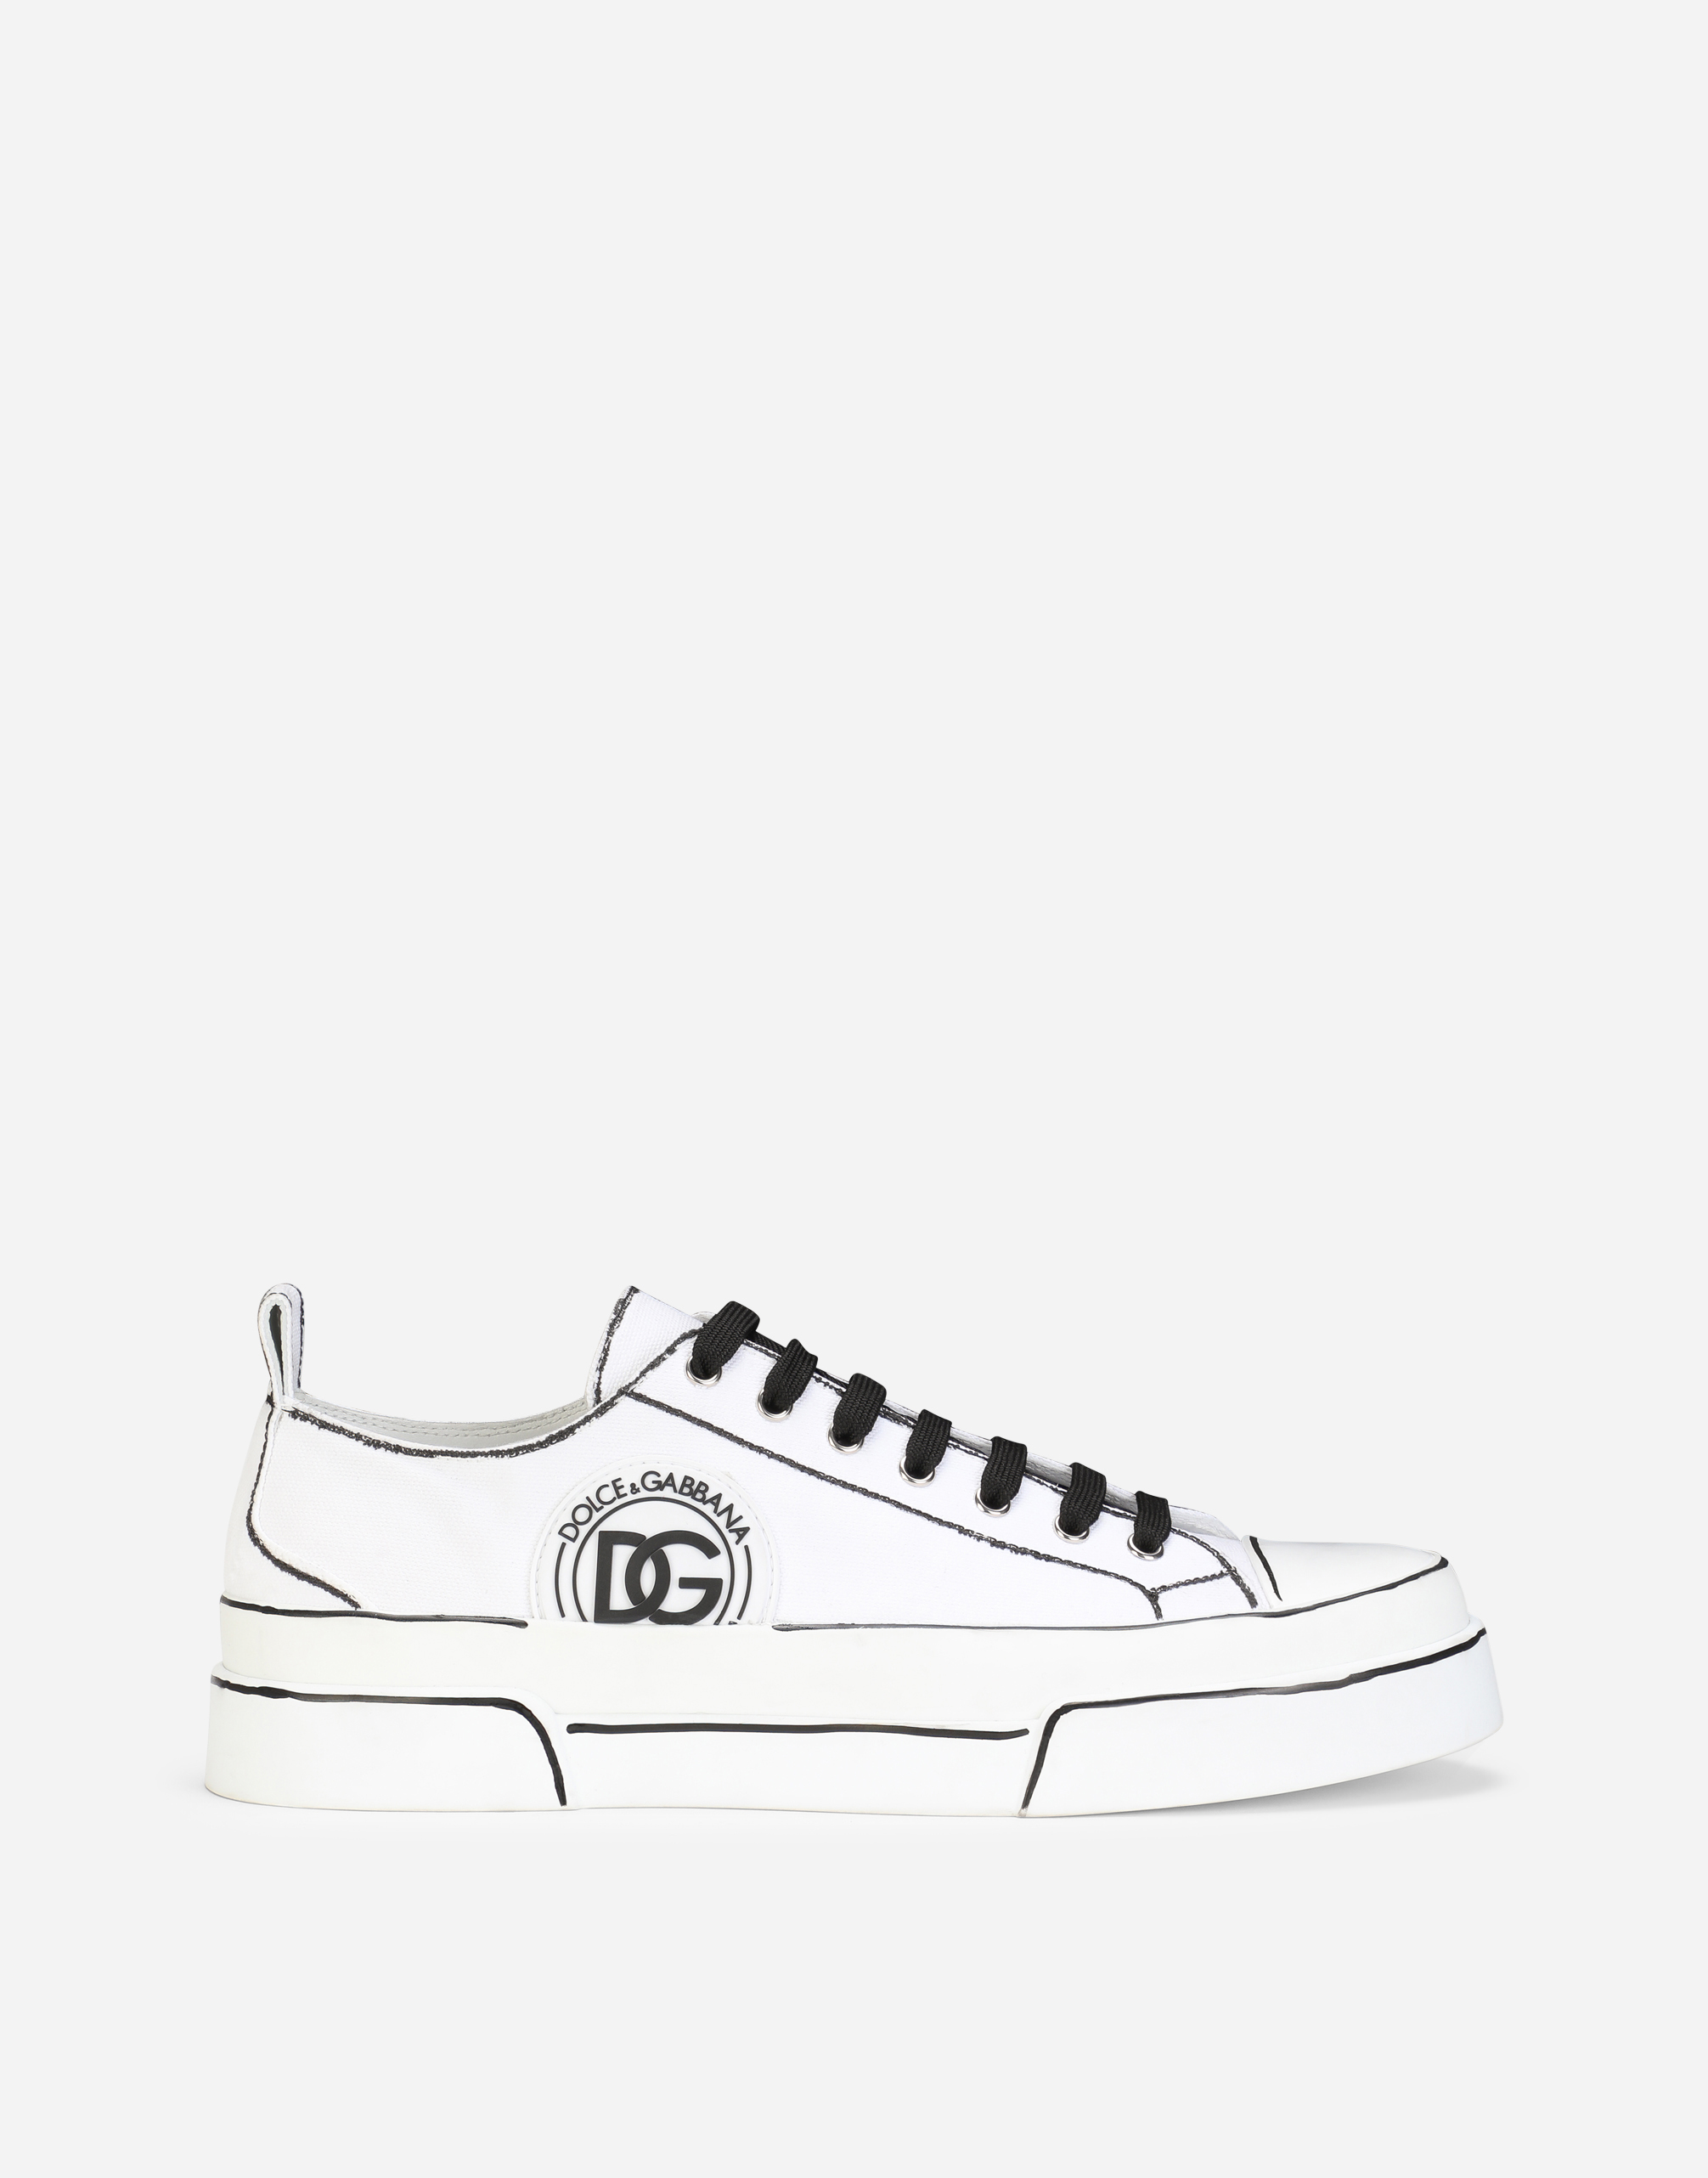 Hand-painted canvas Portofino Light sneakers in White